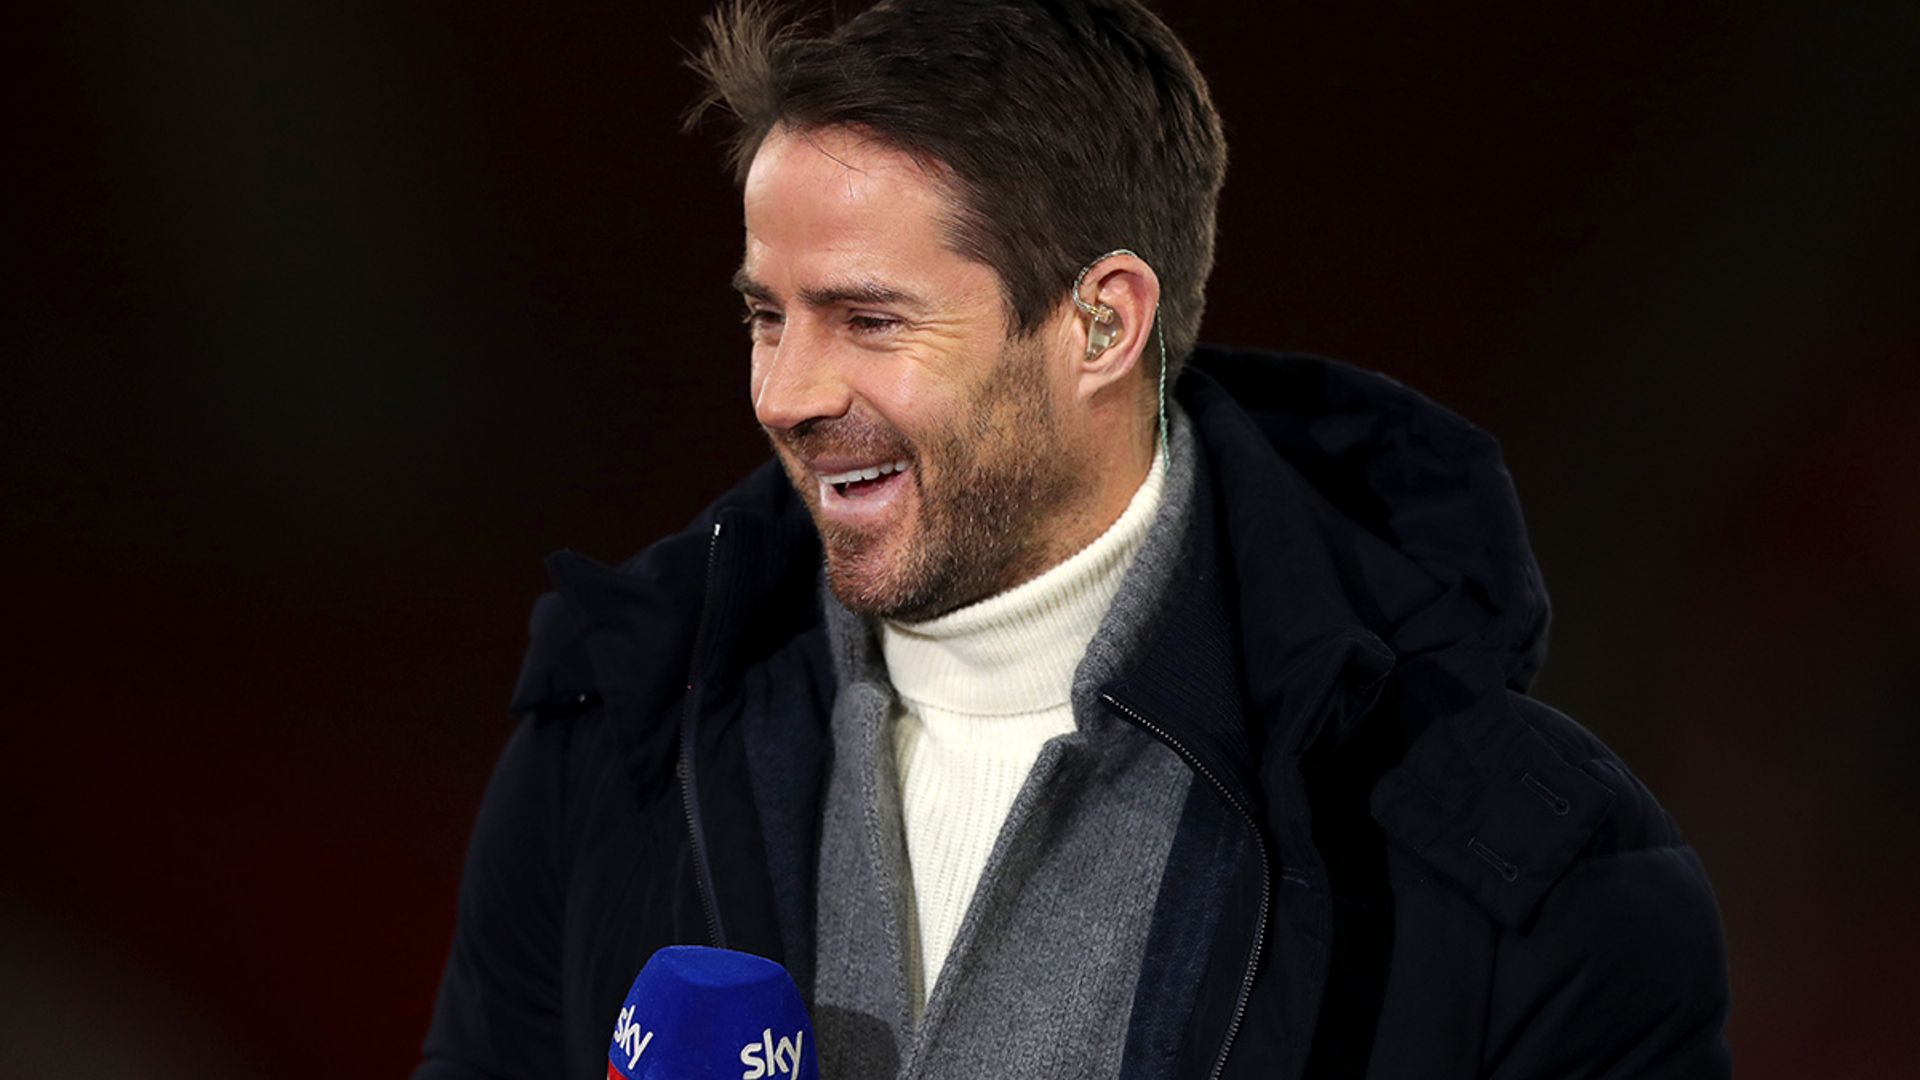 Jamie Redknapp teases son Charley in adorable family video